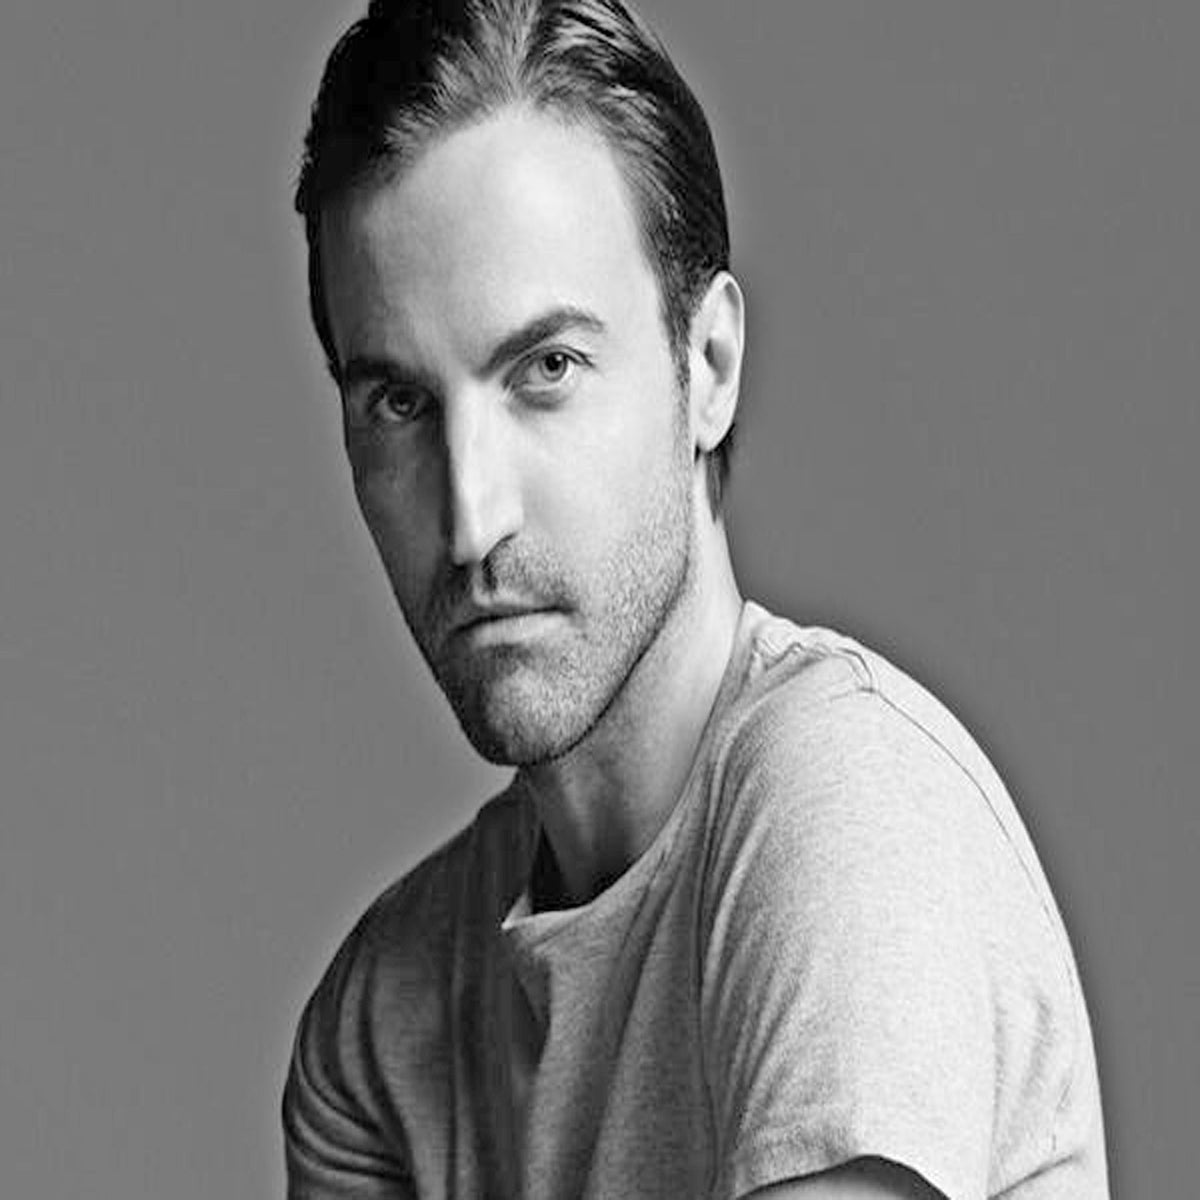 Nicolas Ghesquiere Is the New Designer at Louis Vuitton: What You